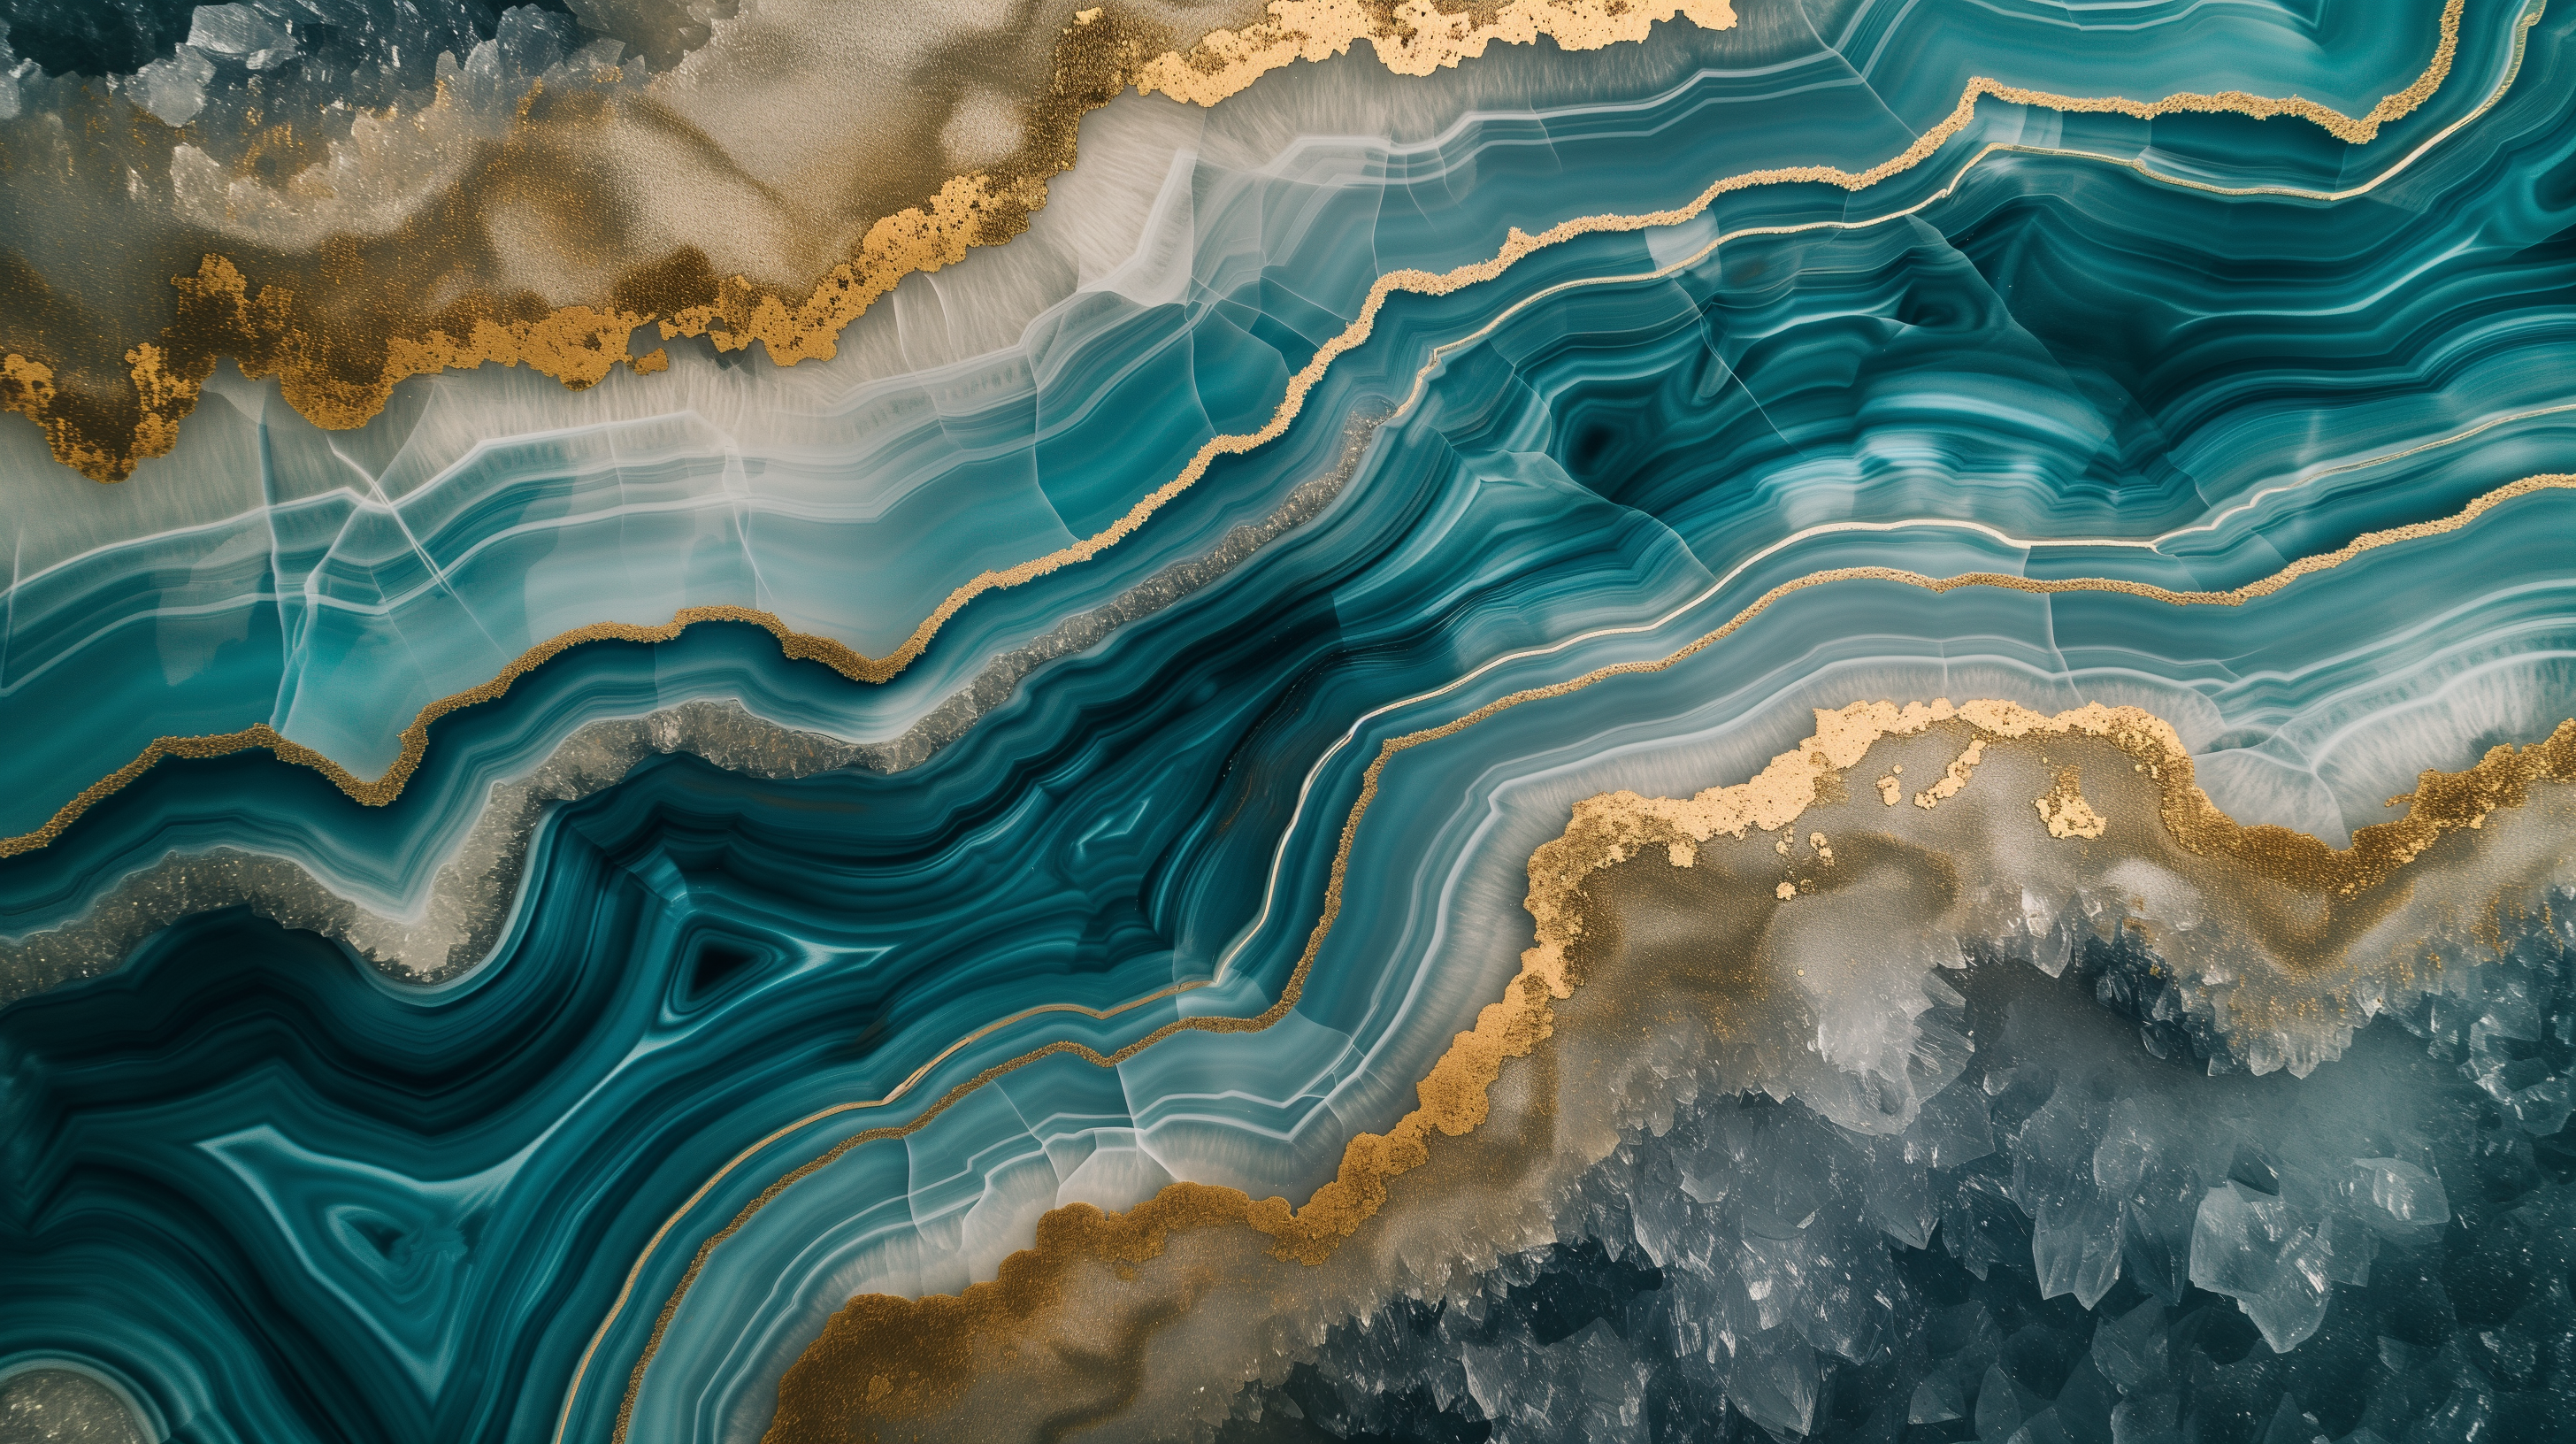 HD wallpaper of a geode with intricate blue and gold layers ideal for desktop background.